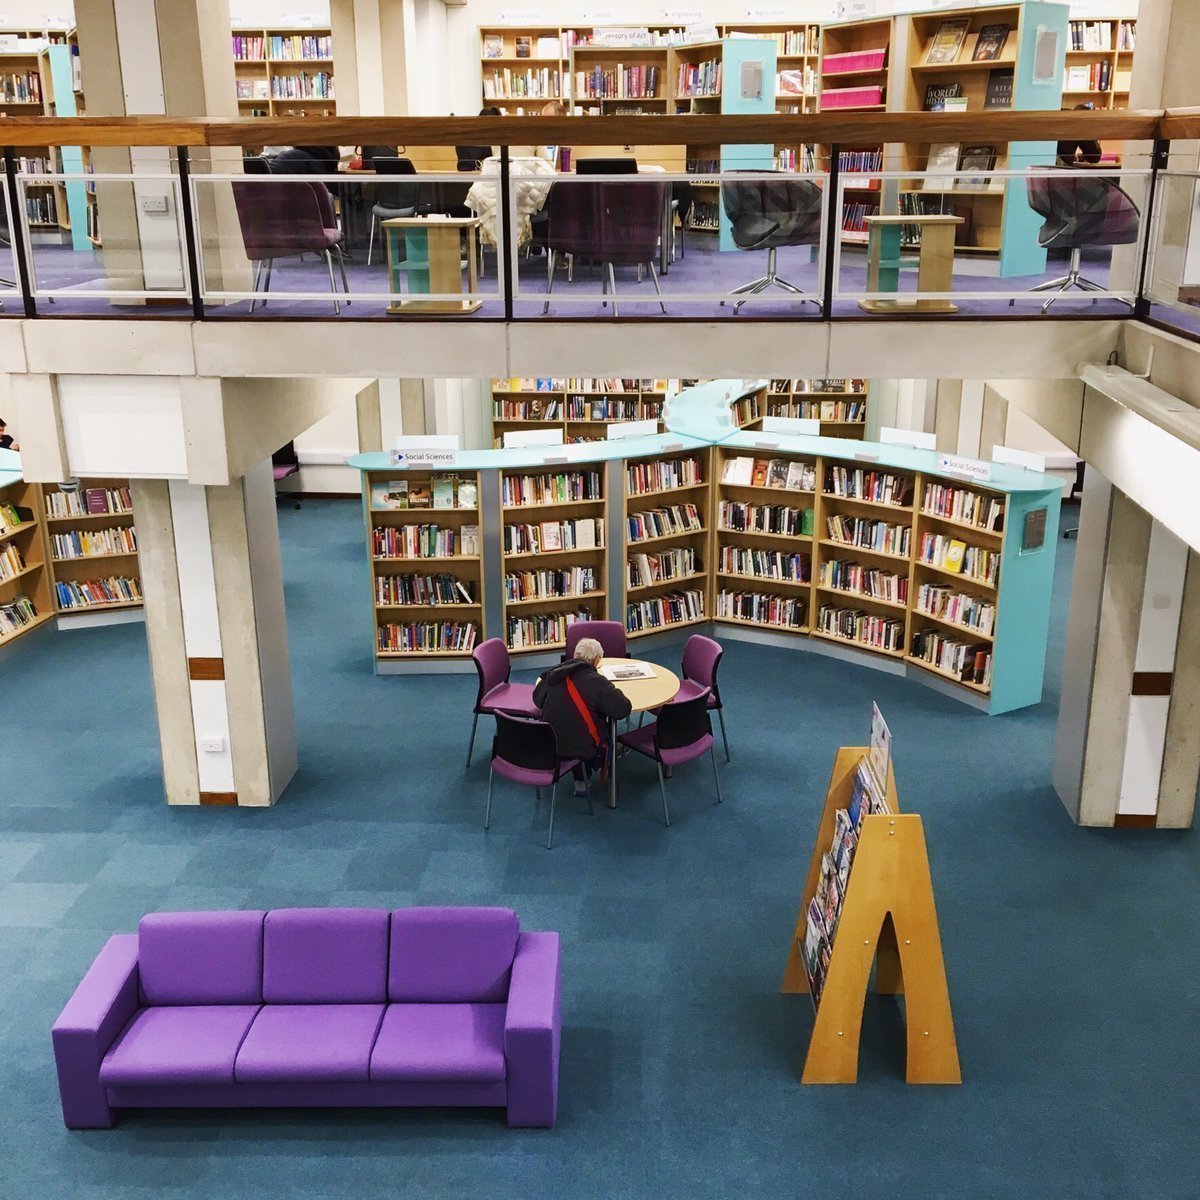 <span class="translation_missing" title="translation missing: en.meta.location_title, location_name: Oxfordshire County Library, city: Oxford">Location Title</span>